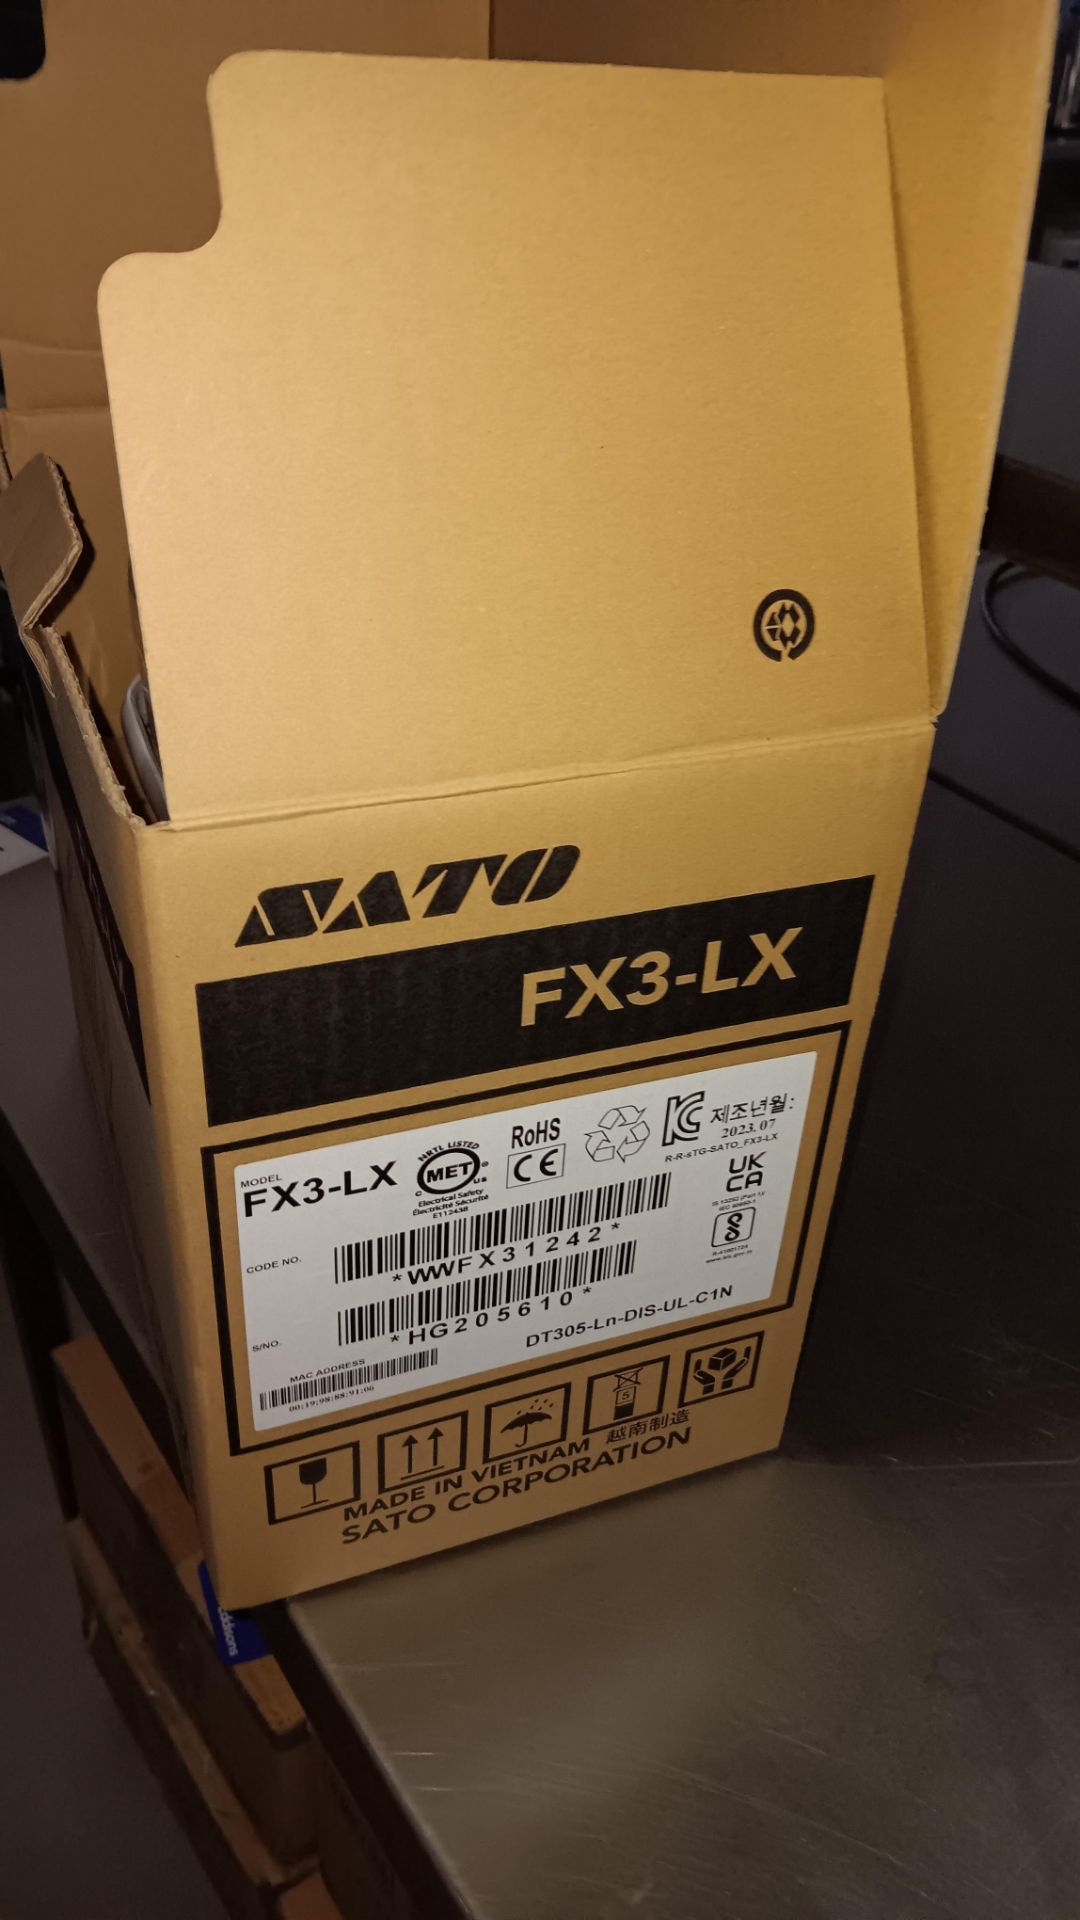 Sato FX3-LX Stand alone direct thermal label printer, serial number HG205610 (Jul 2023) - Image 5 of 5